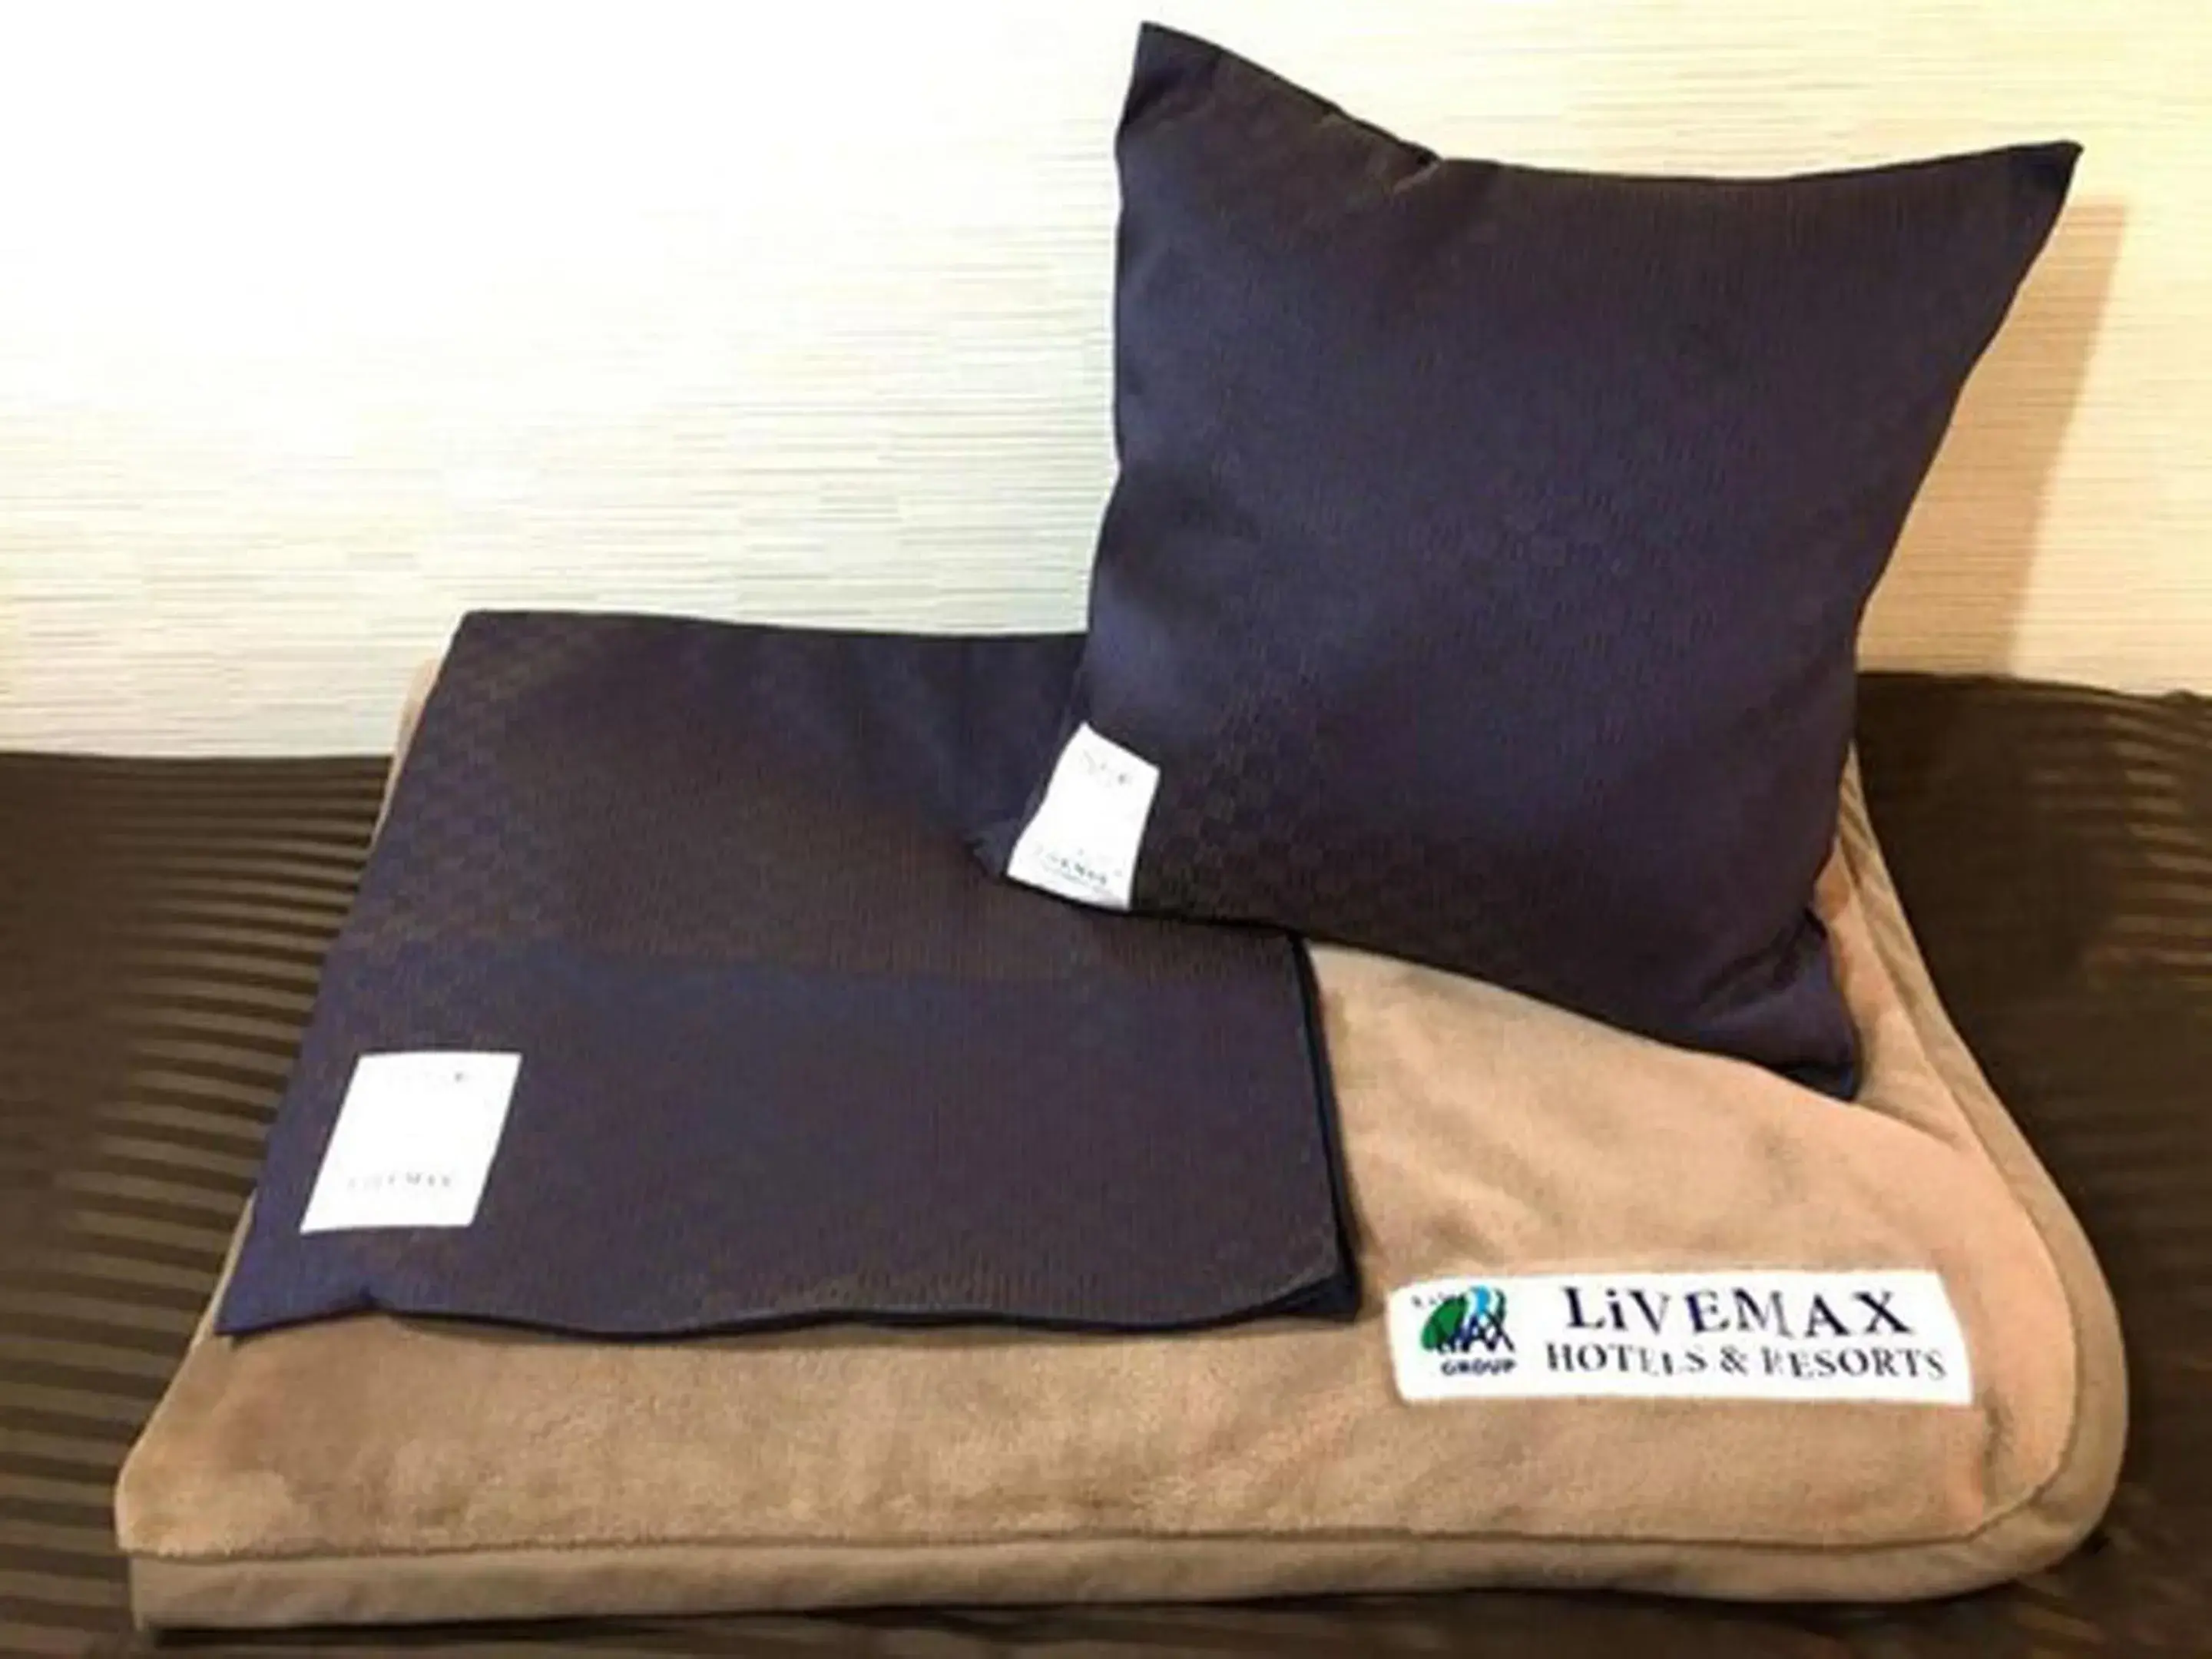 Area and facilities, Bed in HOTEL LiVEMAX BUDGET Fuchu